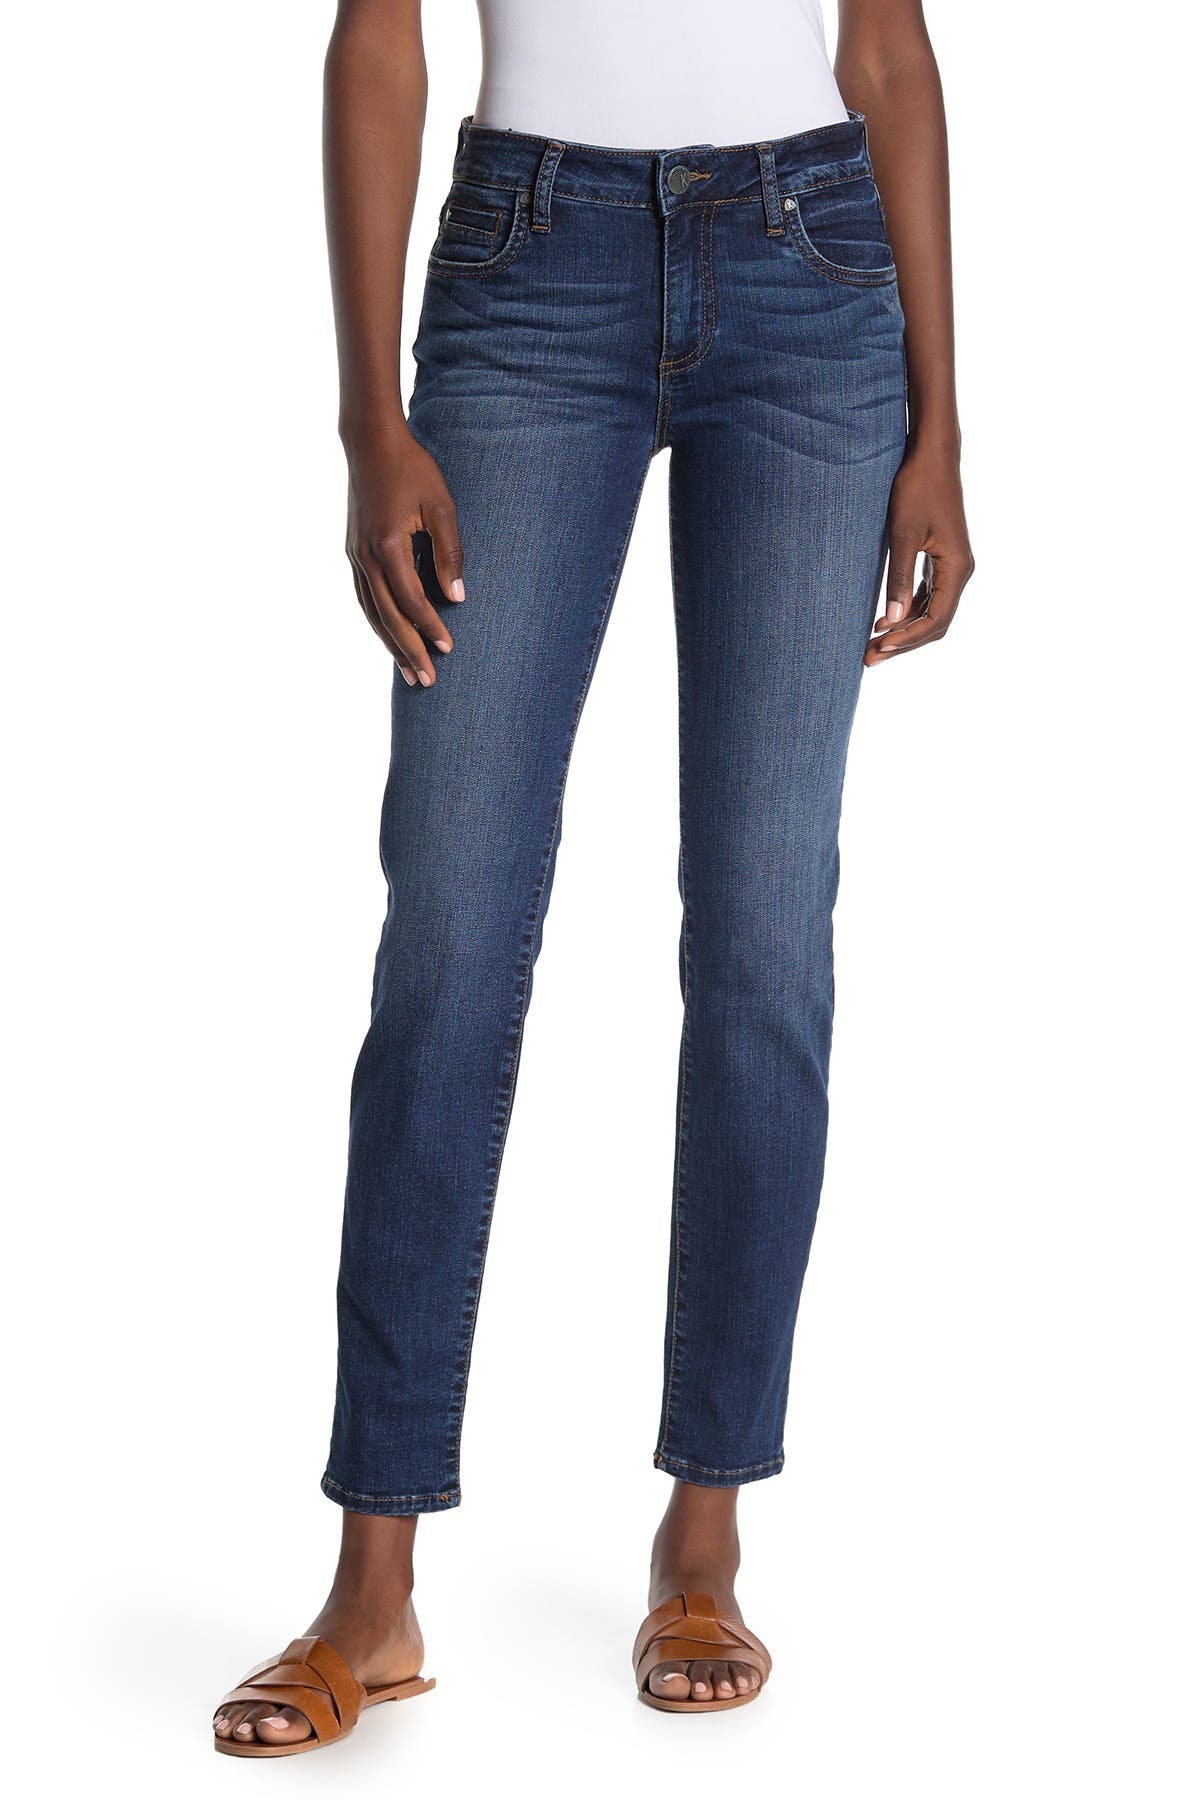 kut from the kloth diana skinny jeans black